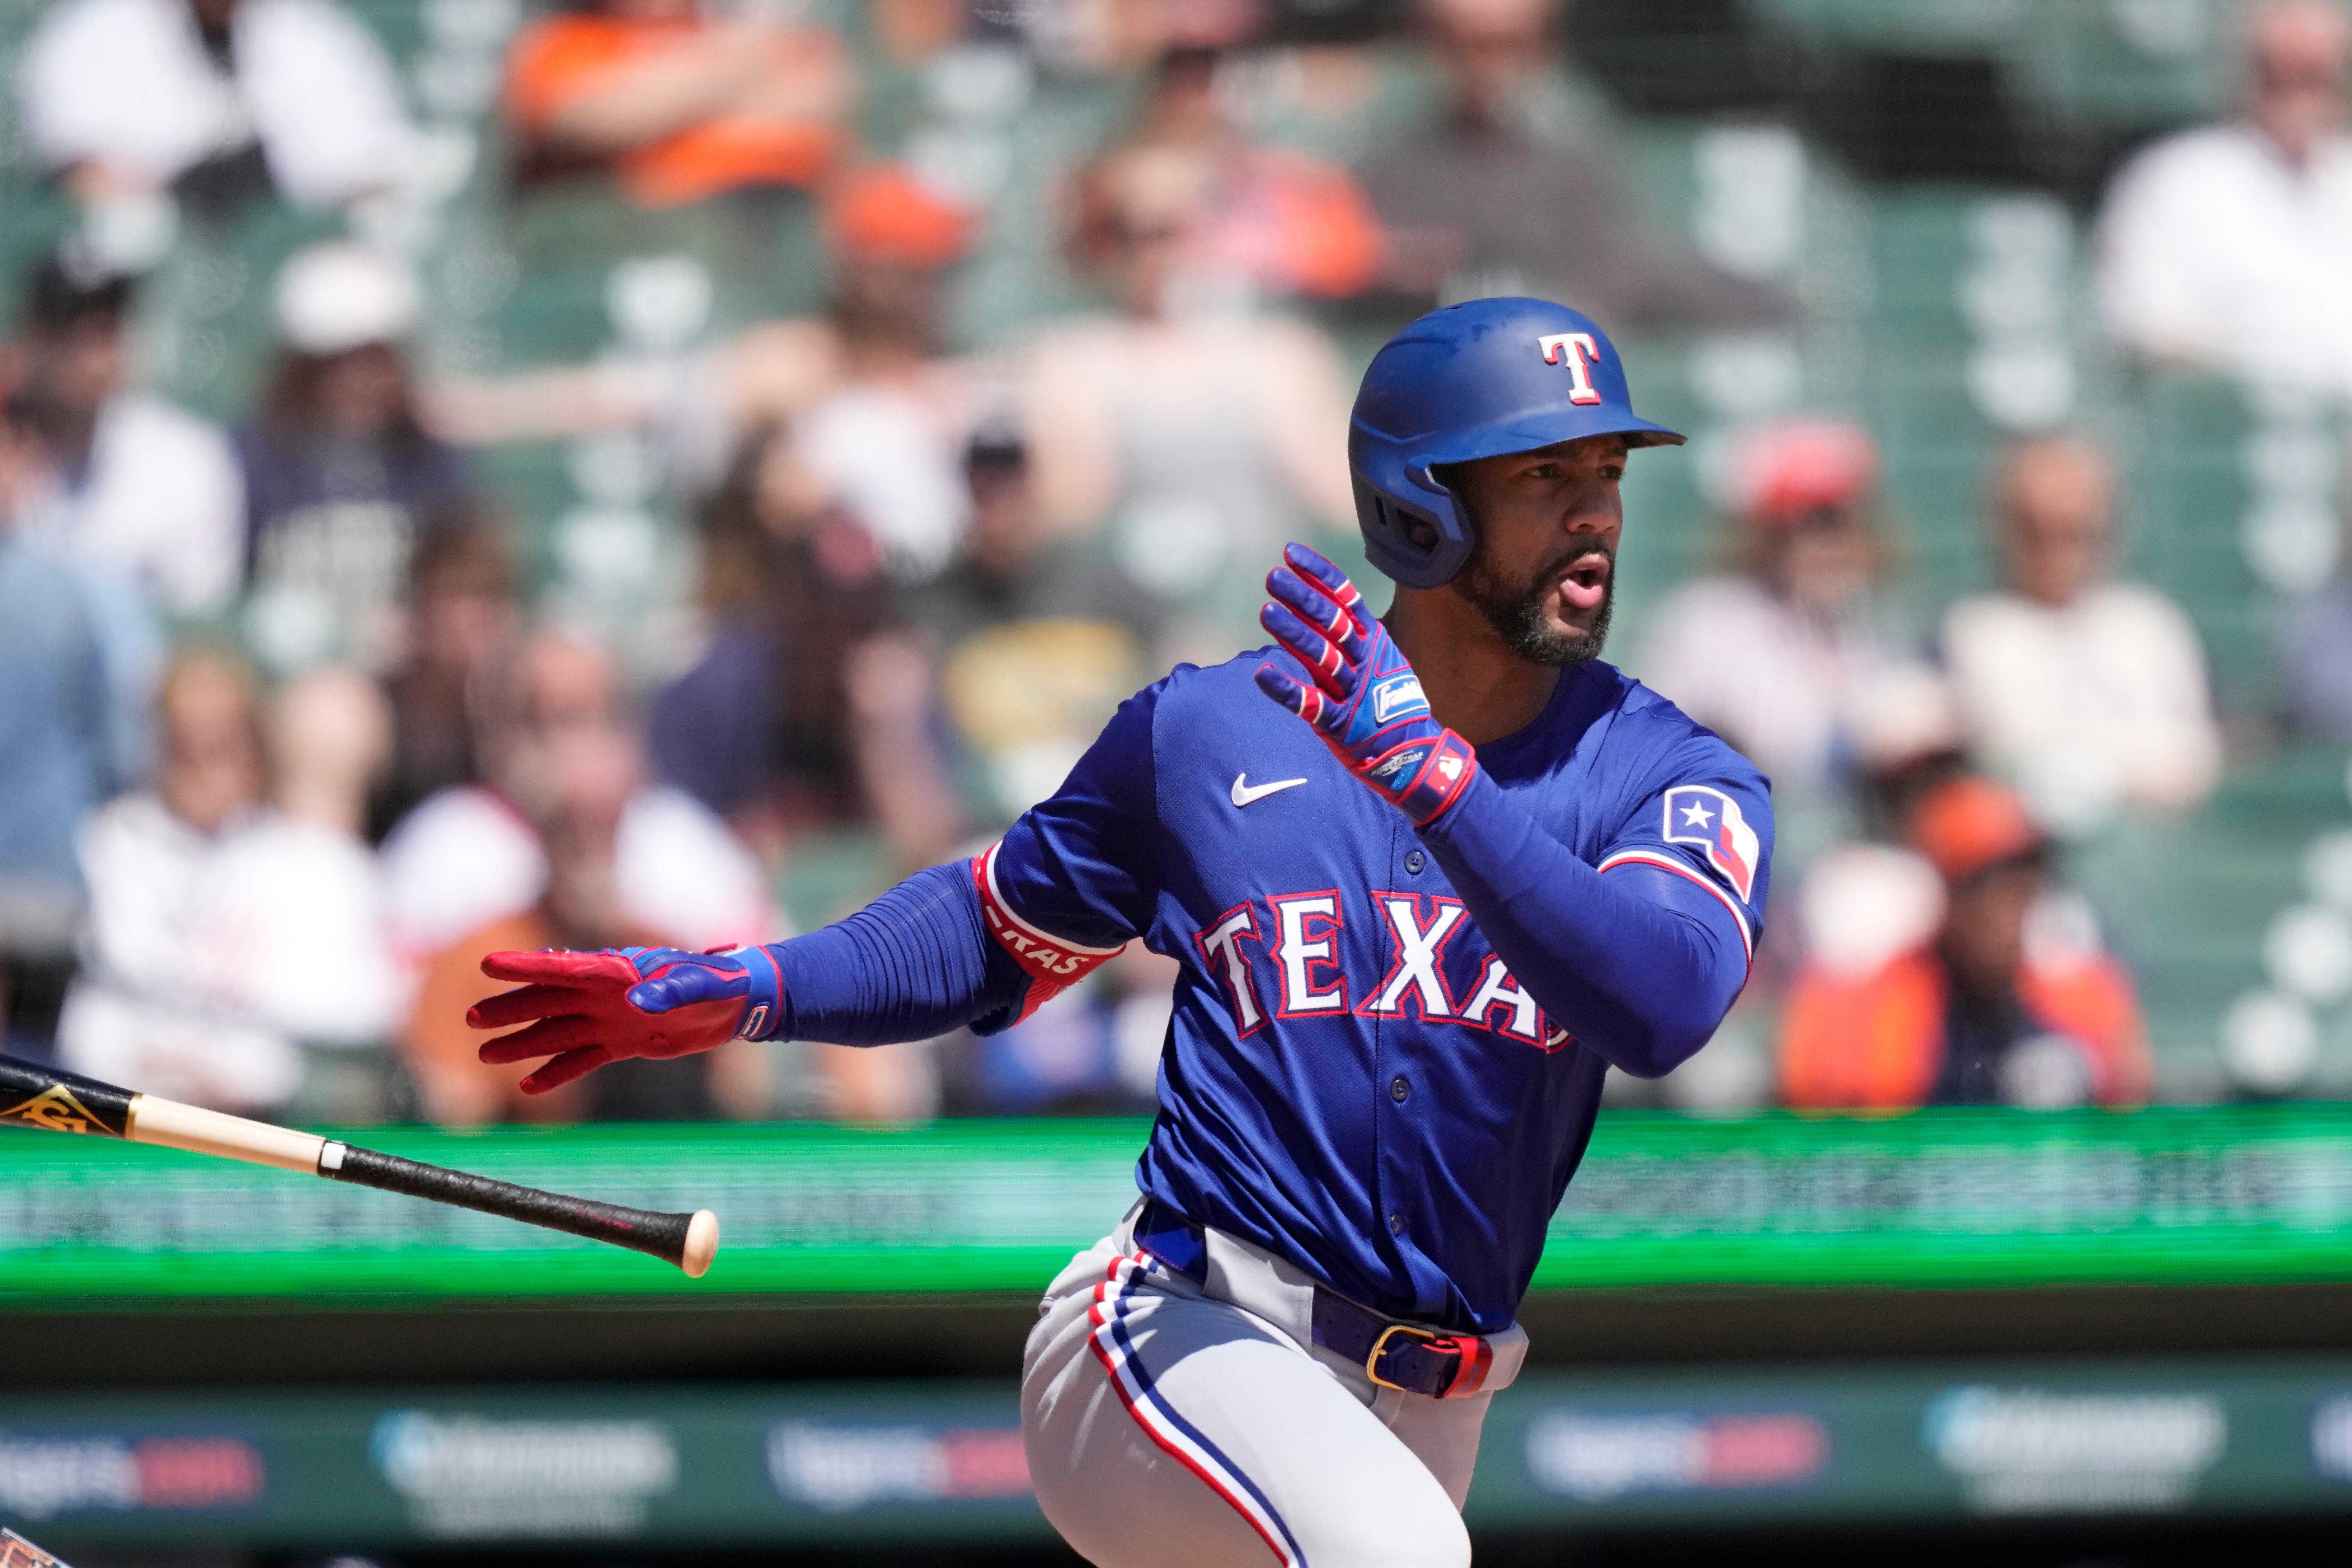 Texas Rangers' Marcus Semien connects for a RBI single to center during the fifth inning.